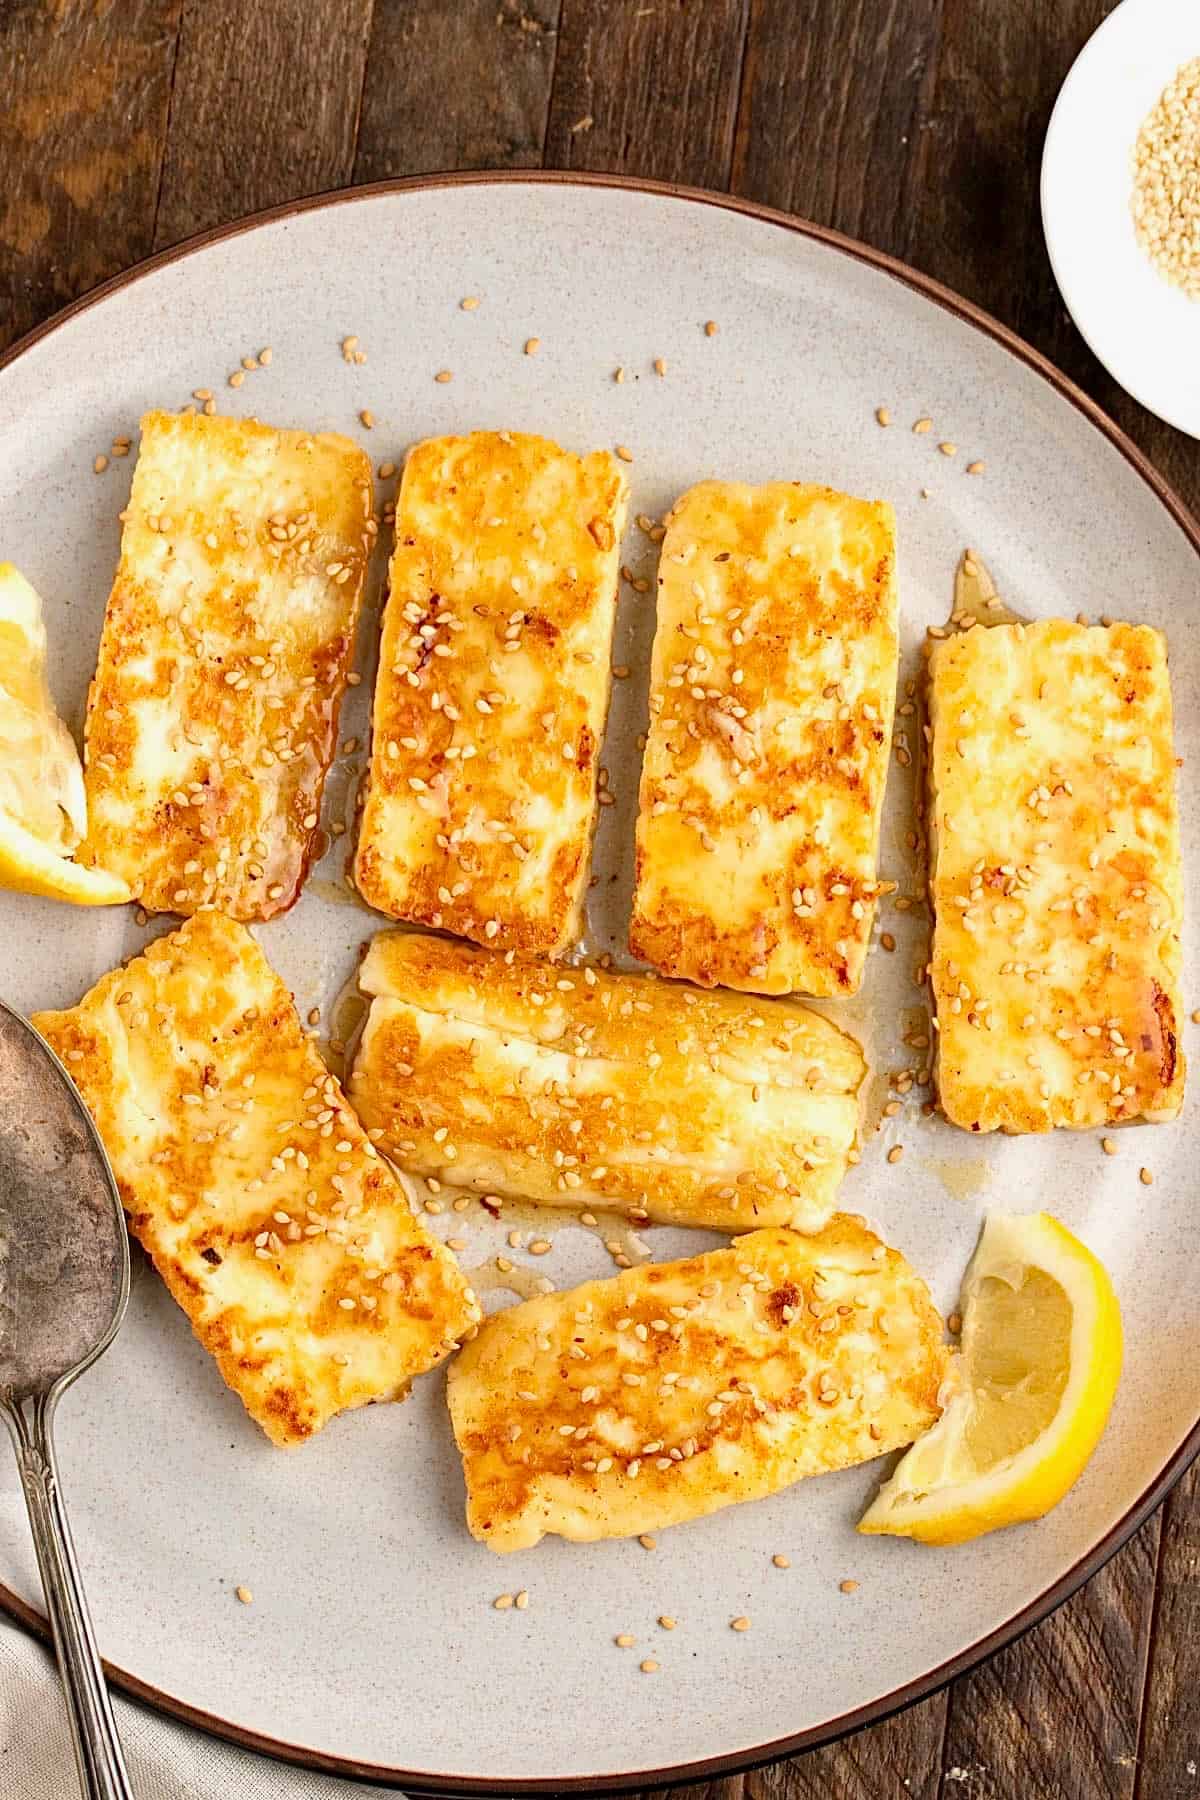 Pan fried Halloumi cheese with honey and sesame